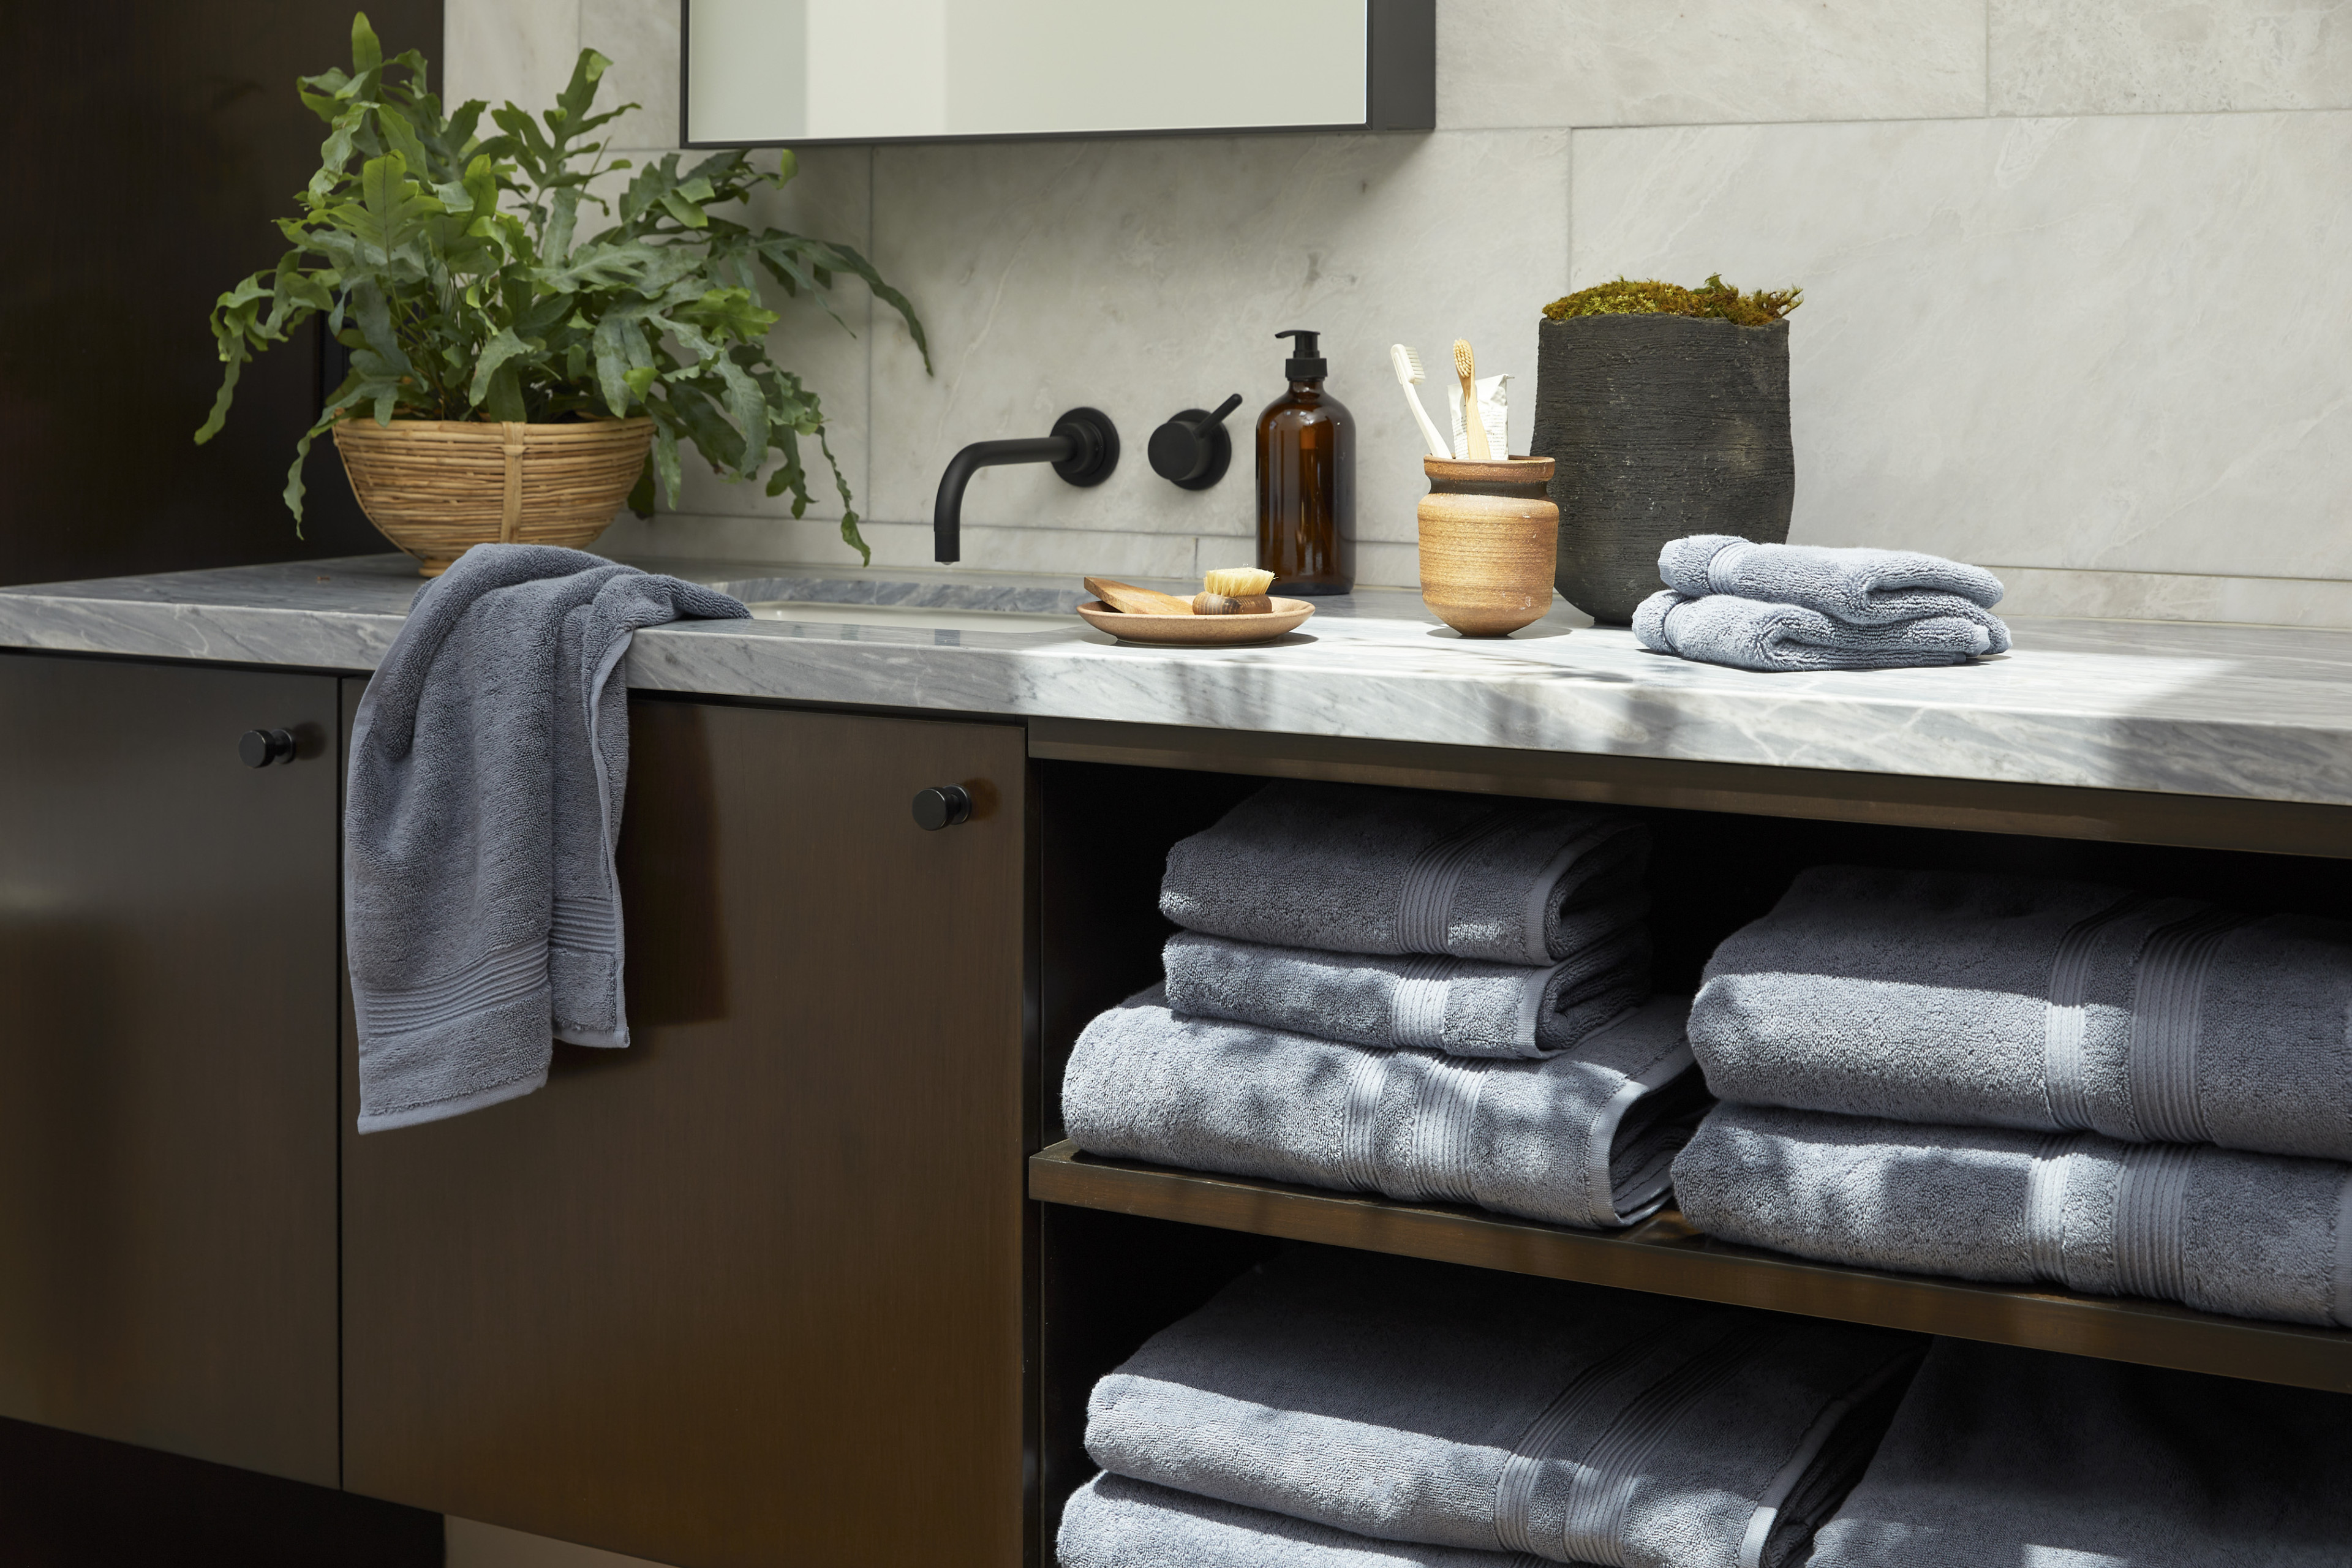 A bathroom with an assortment of towels and decor items.